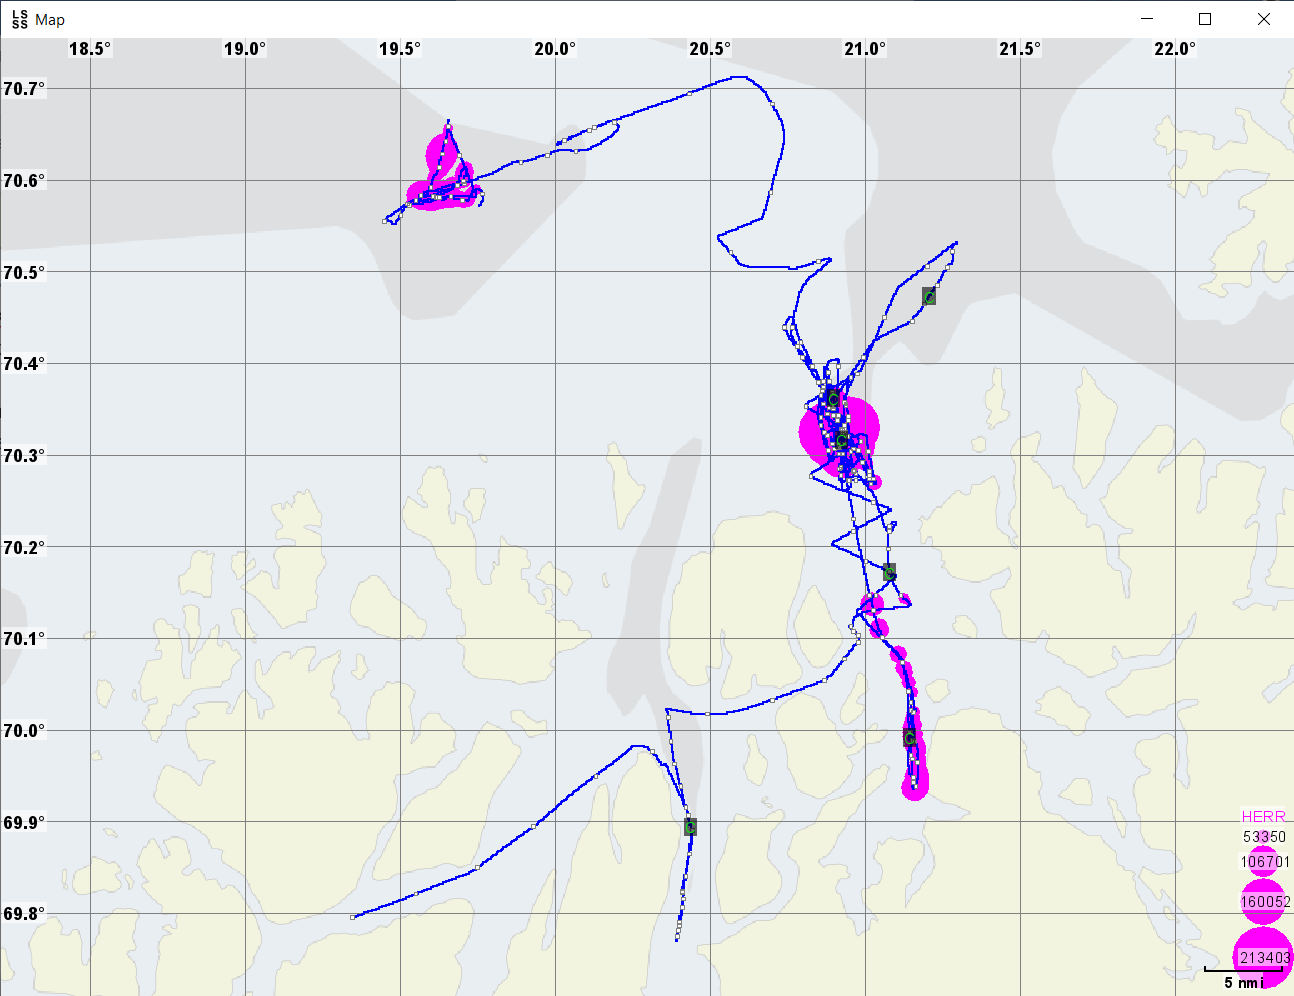 Figure 4. Overview of the survey area in leg 1 (blue line). We covered the Lyngen and Reisafjords and outer parts of Kvænangen and further off the coast at the 12 nm border. Herring detections are marked as pink bubbles (size reflecting the amount of fish).